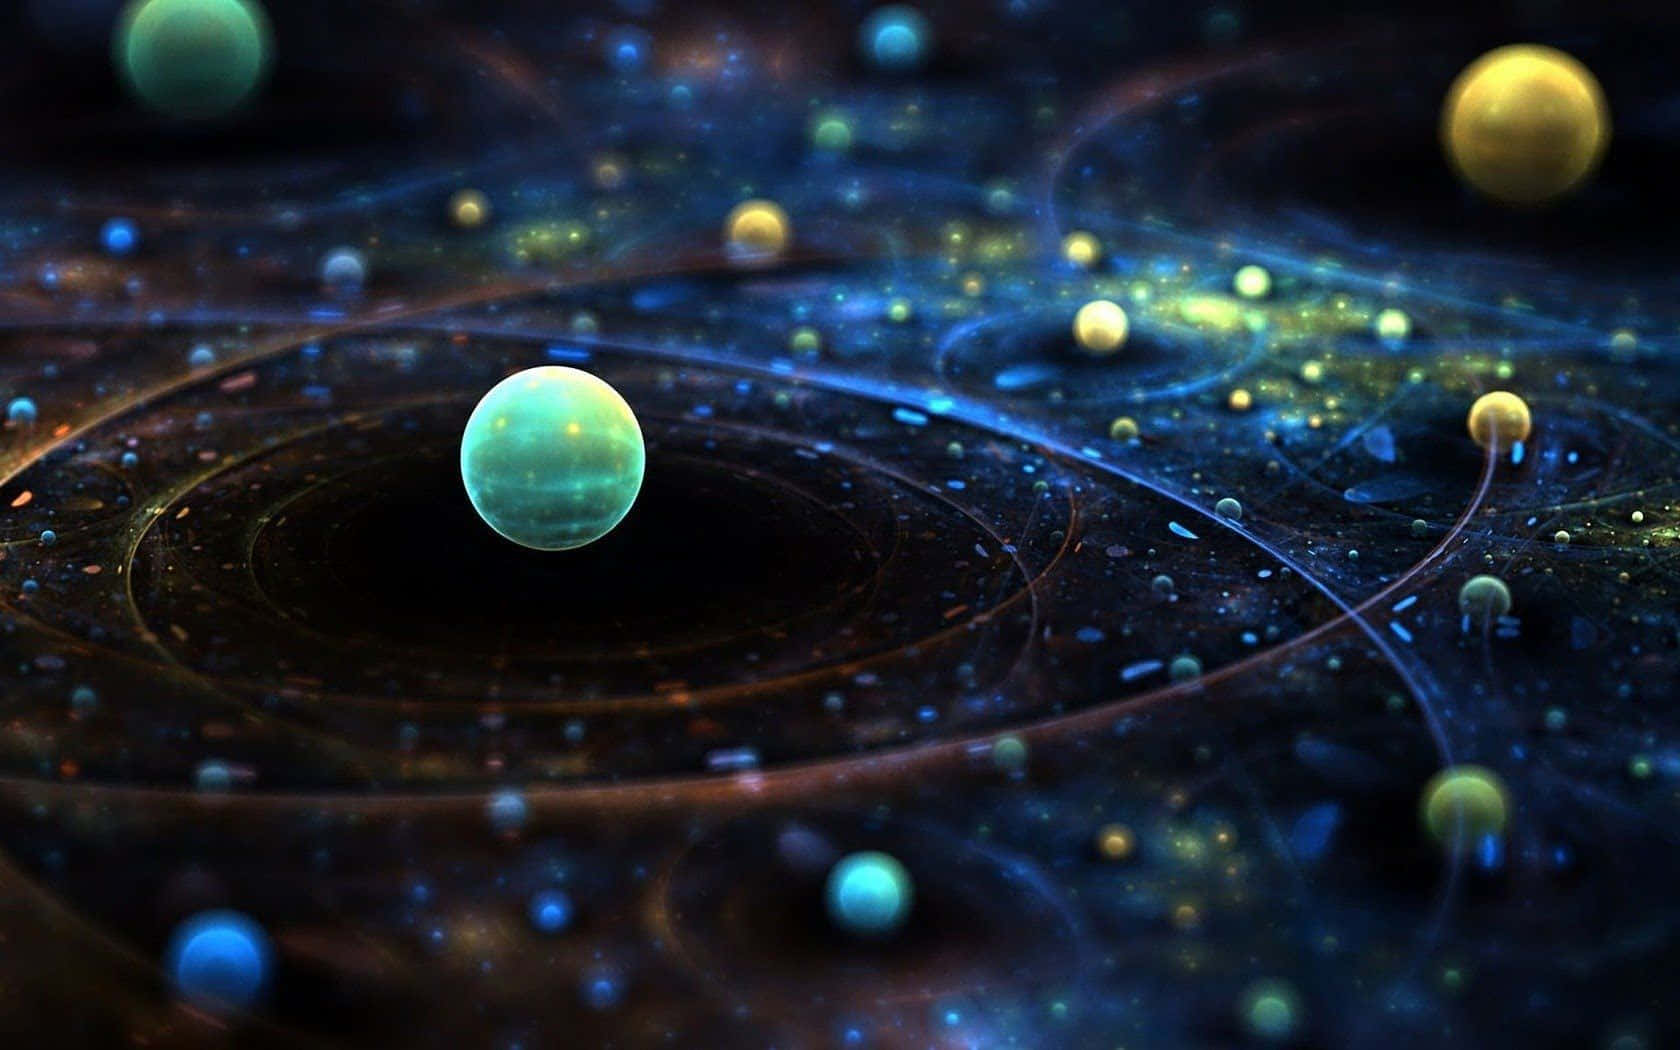 Interconnected Forces: Exploring the Physics of Our Universe"